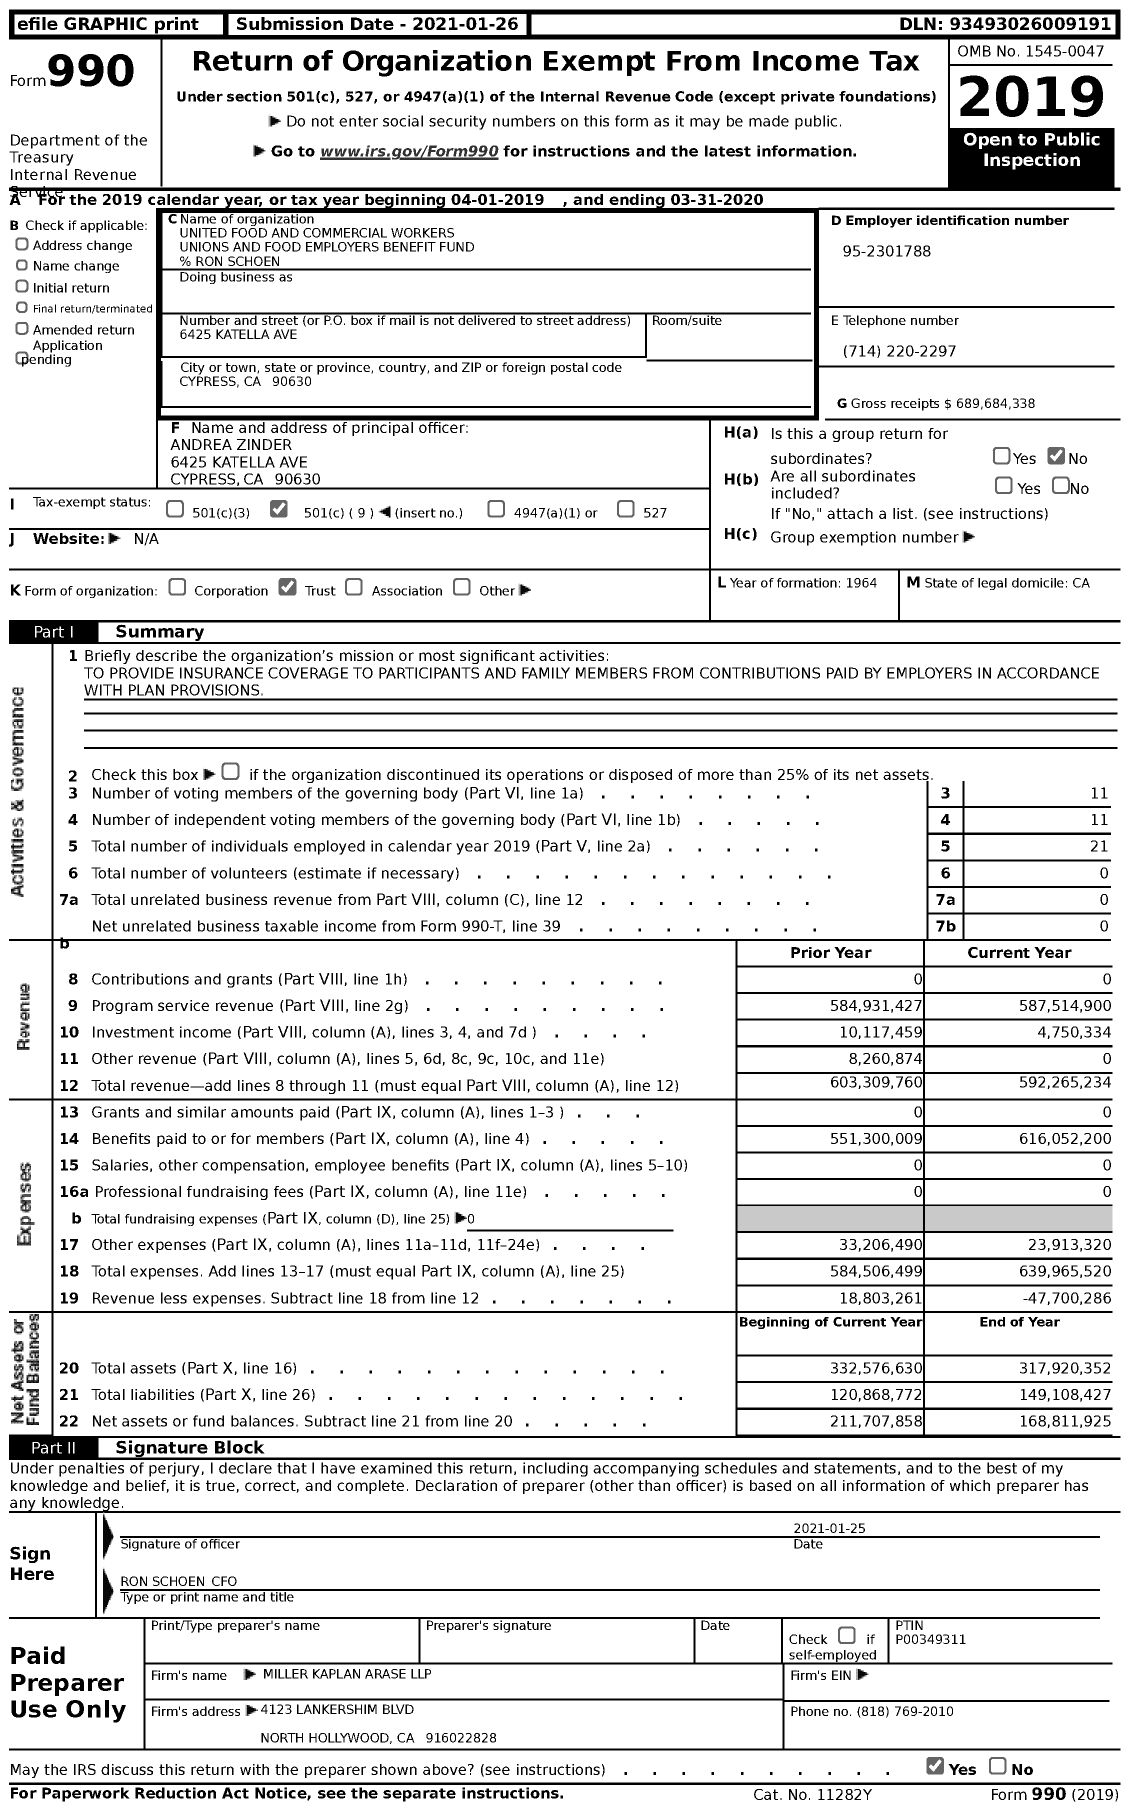 Image of first page of 2019 Form 990 for United Food and Commercial Workers Unions and Food Employers Benefit Fund